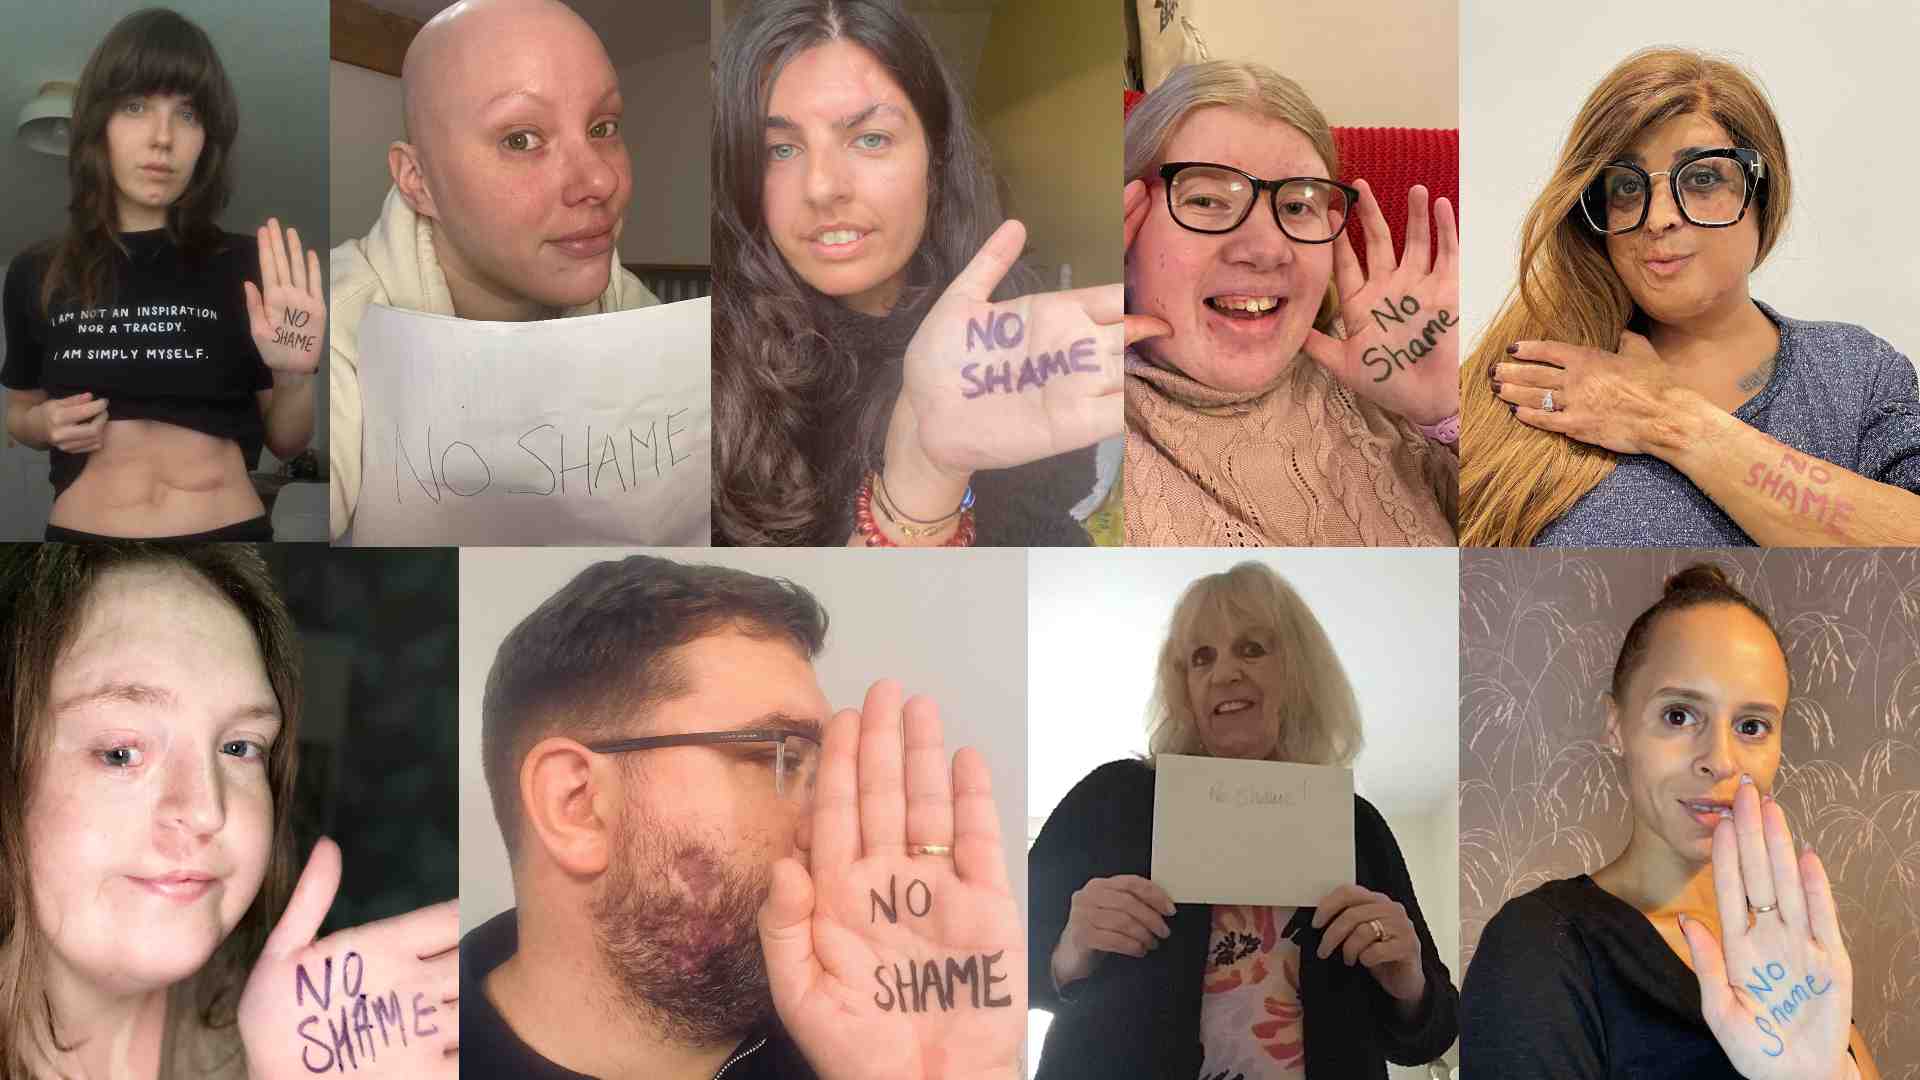 Collage of campaigner pictures each with no shame written next to scars and visible differences